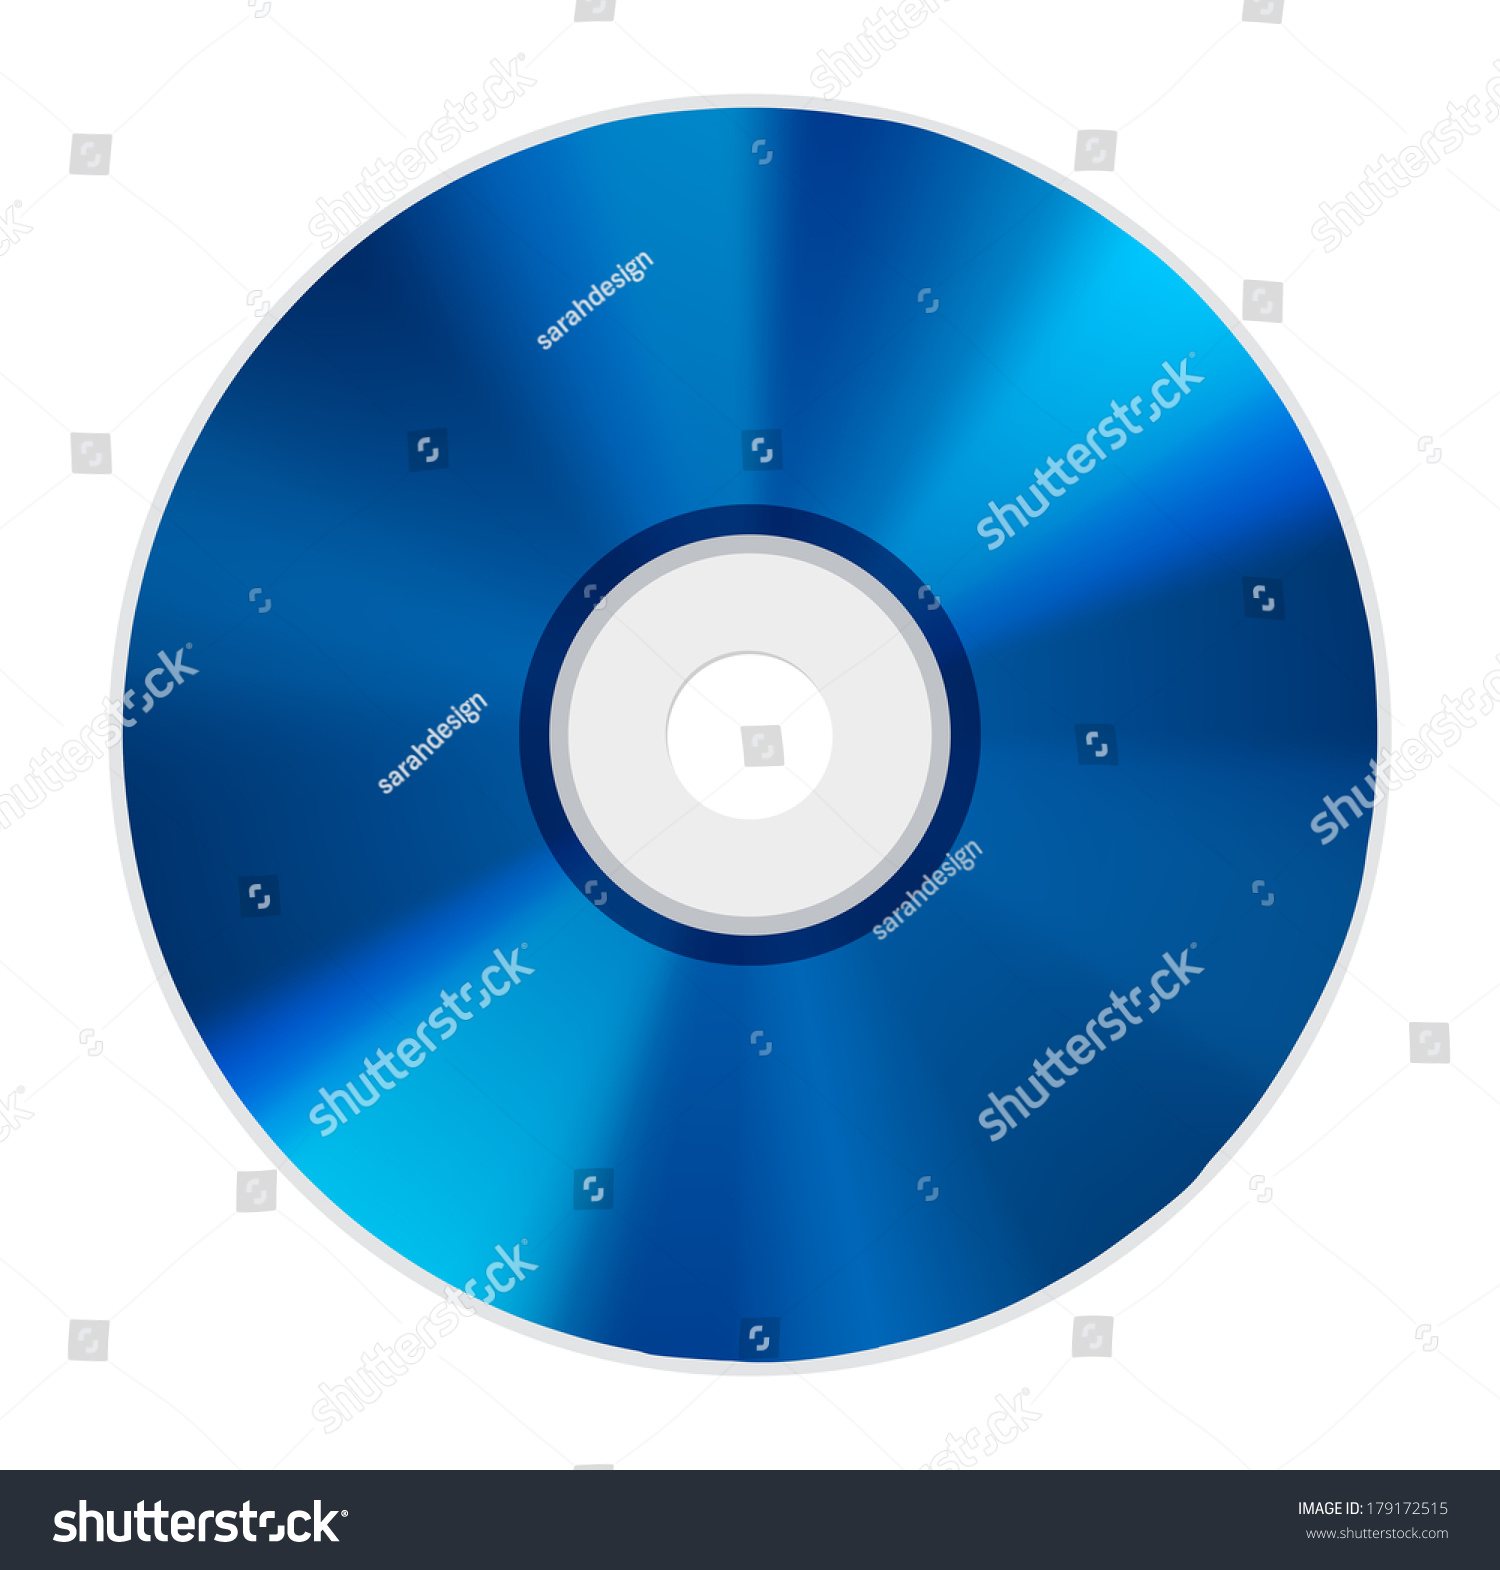 Cd, DVD, compact disk, blue ray icon sign. Seamless pattern with 